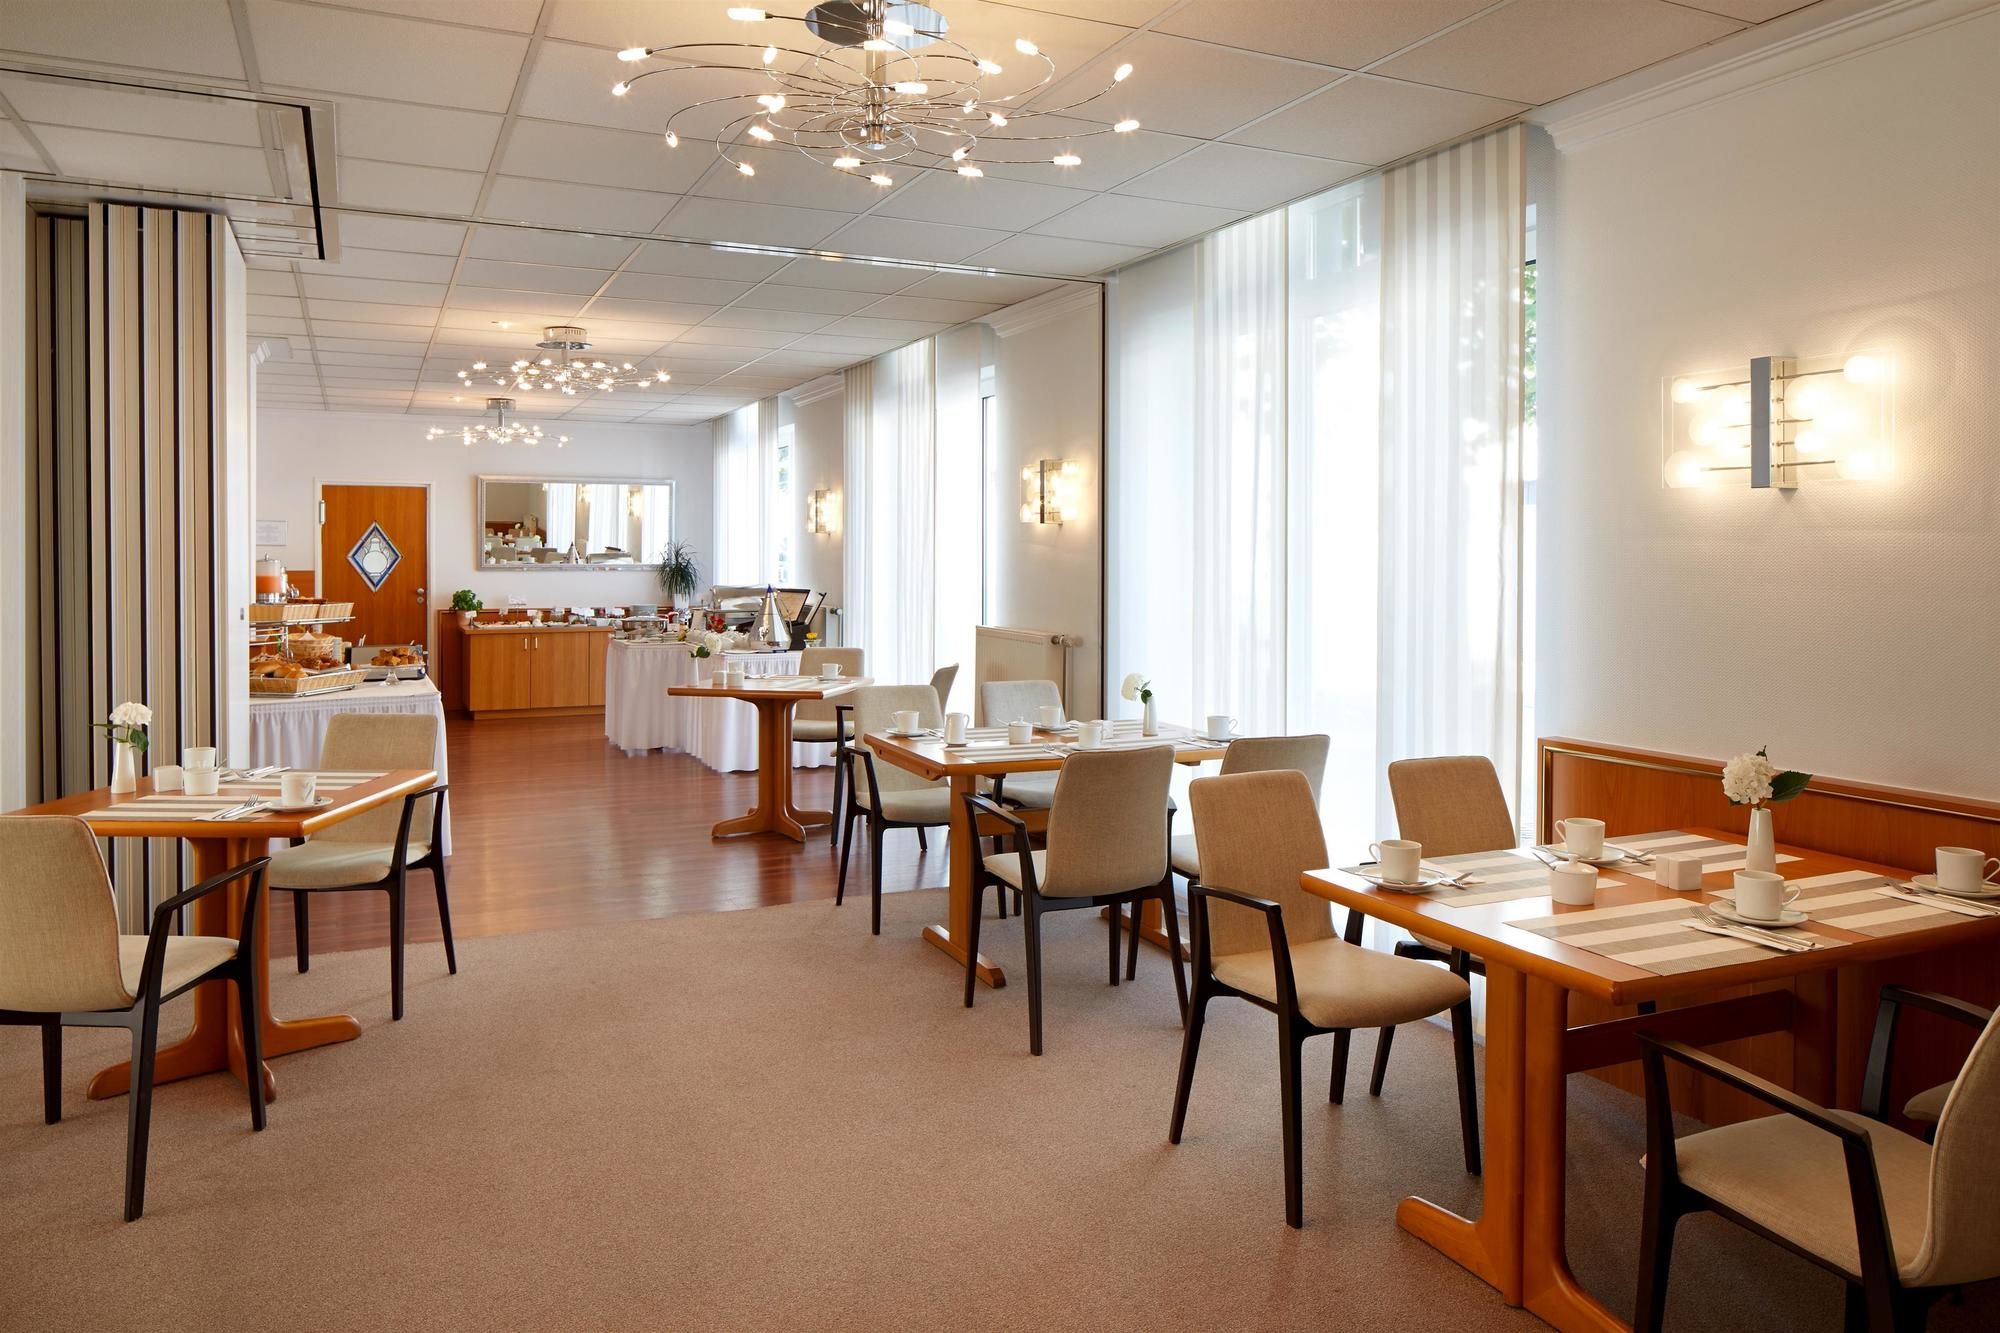 Best Western Hotel Lippstadt <br/>138.89 ew <br/> <a href='http://vakantieoplossing.nl/outpage/?id=2255fc7aa36838e6c3ffbfd818a8bf37' target='_blank'>View Details</a>